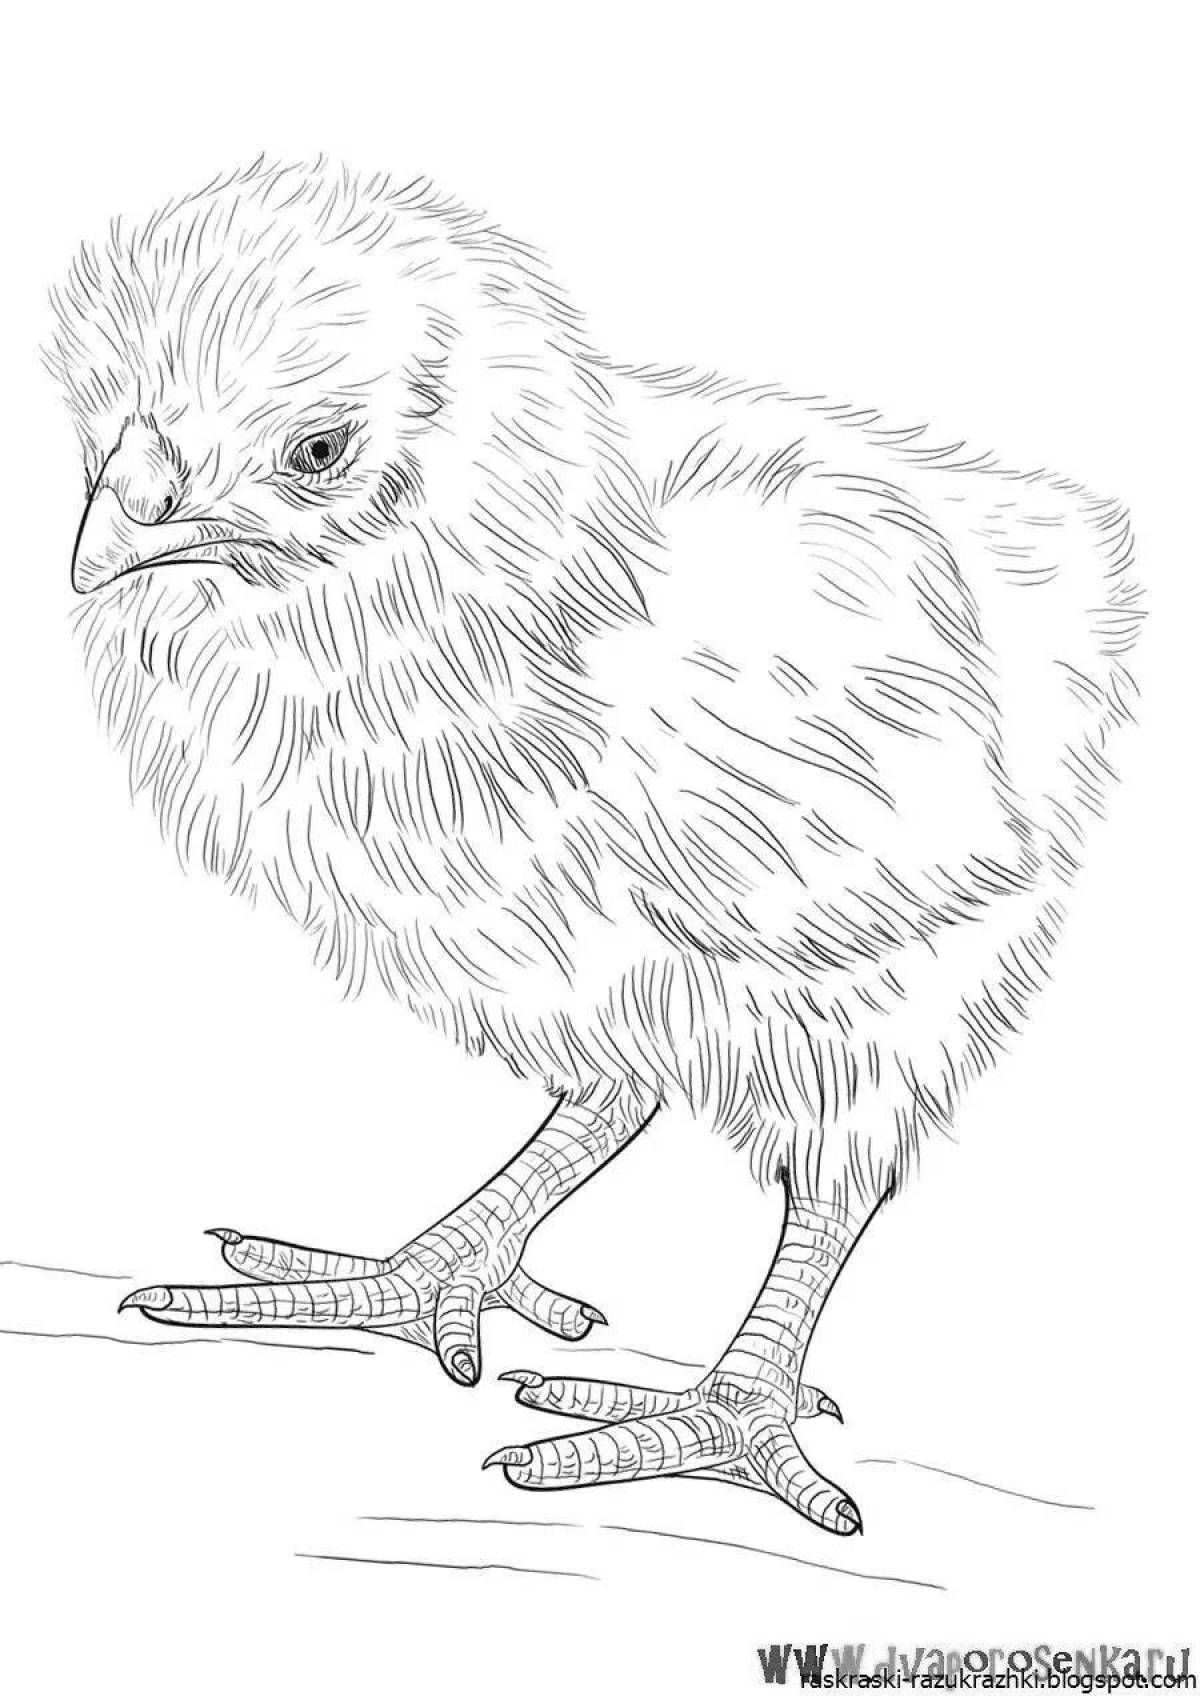 Adorable chick drawing for kids